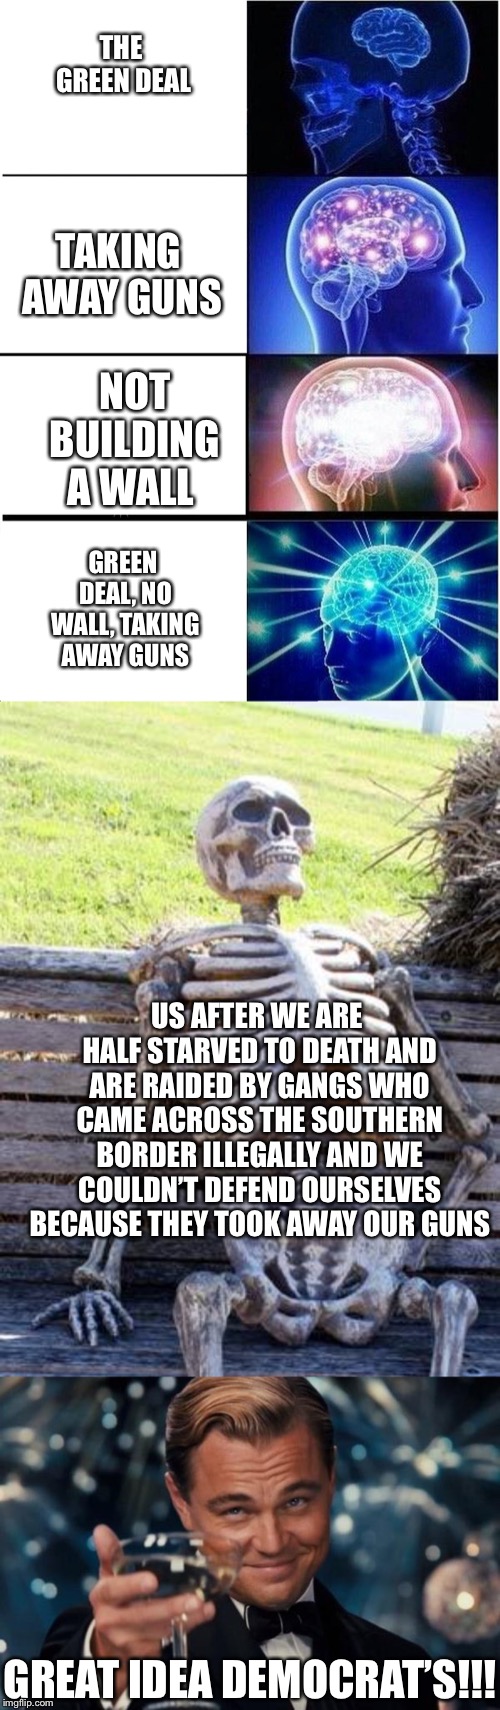 THE GREEN DEAL; TAKING AWAY GUNS; NOT BUILDING A WALL; GREEN DEAL, NO WALL, TAKING AWAY GUNS; US AFTER WE ARE HALF STARVED TO DEATH AND ARE RAIDED BY GANGS WHO CAME ACROSS THE SOUTHERN BORDER ILLEGALLY AND WE COULDN’T DEFEND OURSELVES BECAUSE THEY TOOK AWAY OUR GUNS; GREAT IDEA DEMOCRAT’S!!! | image tagged in memes,waiting skeleton,leonardo dicaprio cheers,expanding brain | made w/ Imgflip meme maker